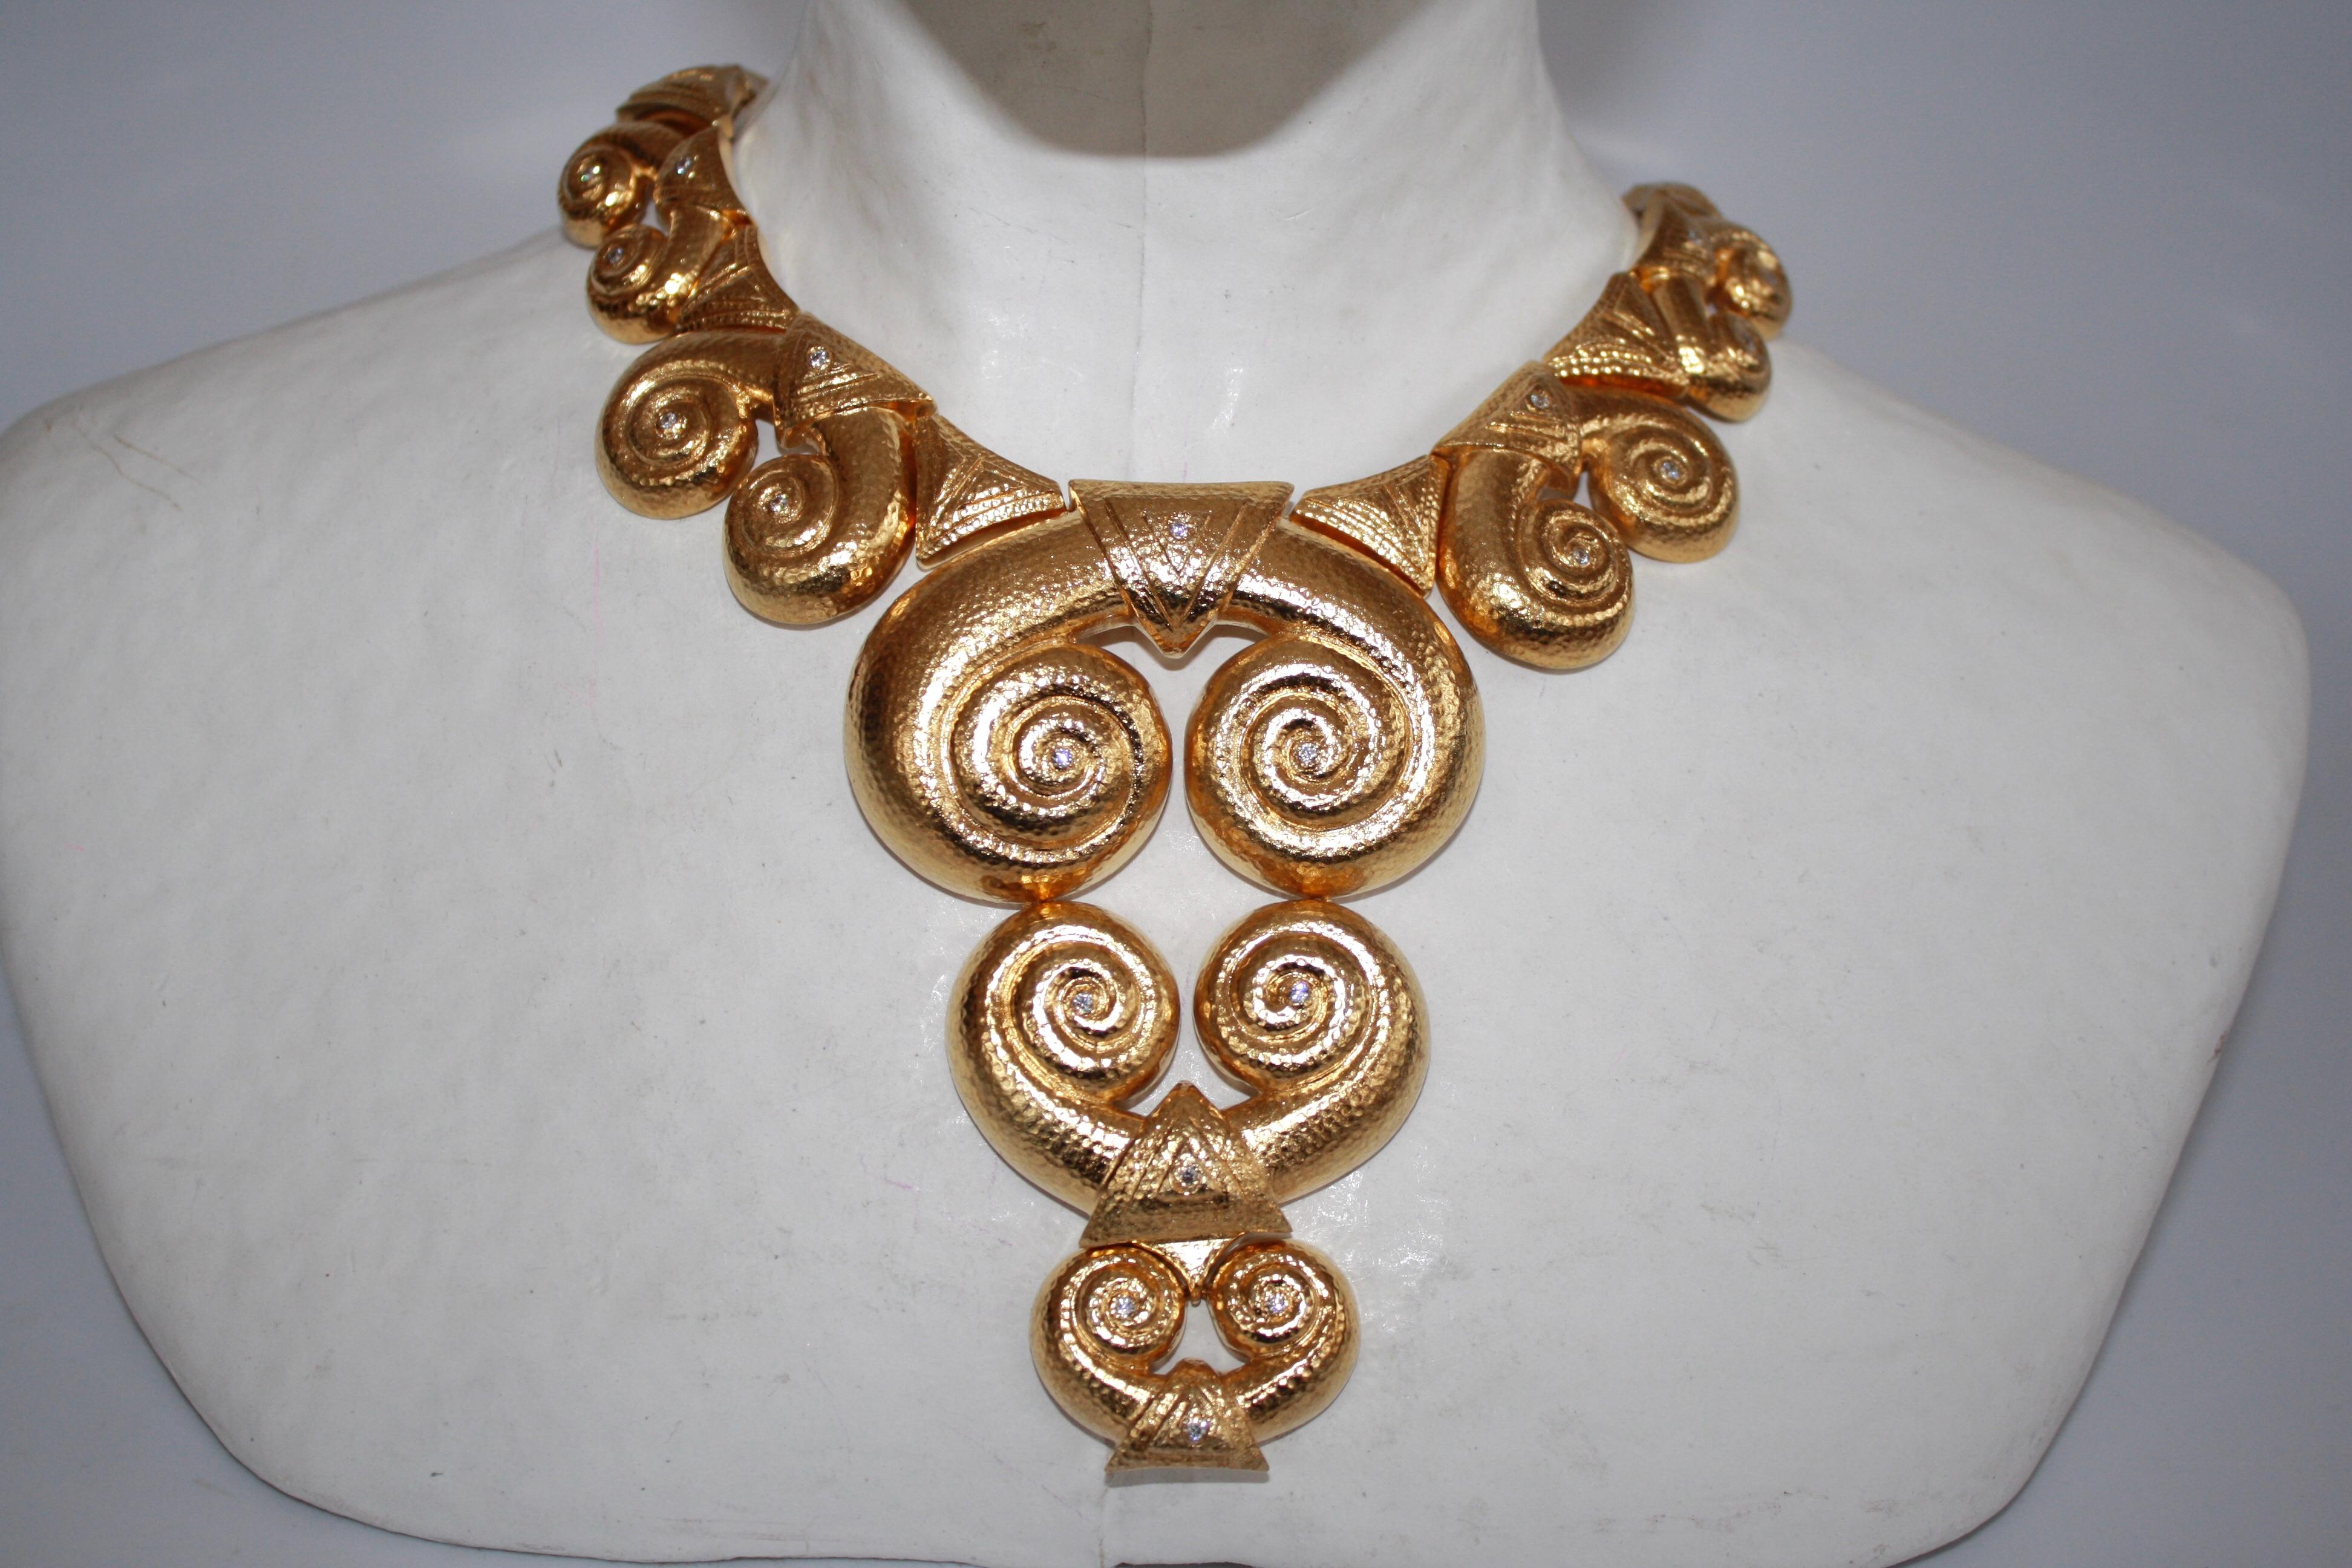 Extraordinary gold statement necklace from J.Kasi limited série collection. Brass plated with 24kt gold and hand hammered.